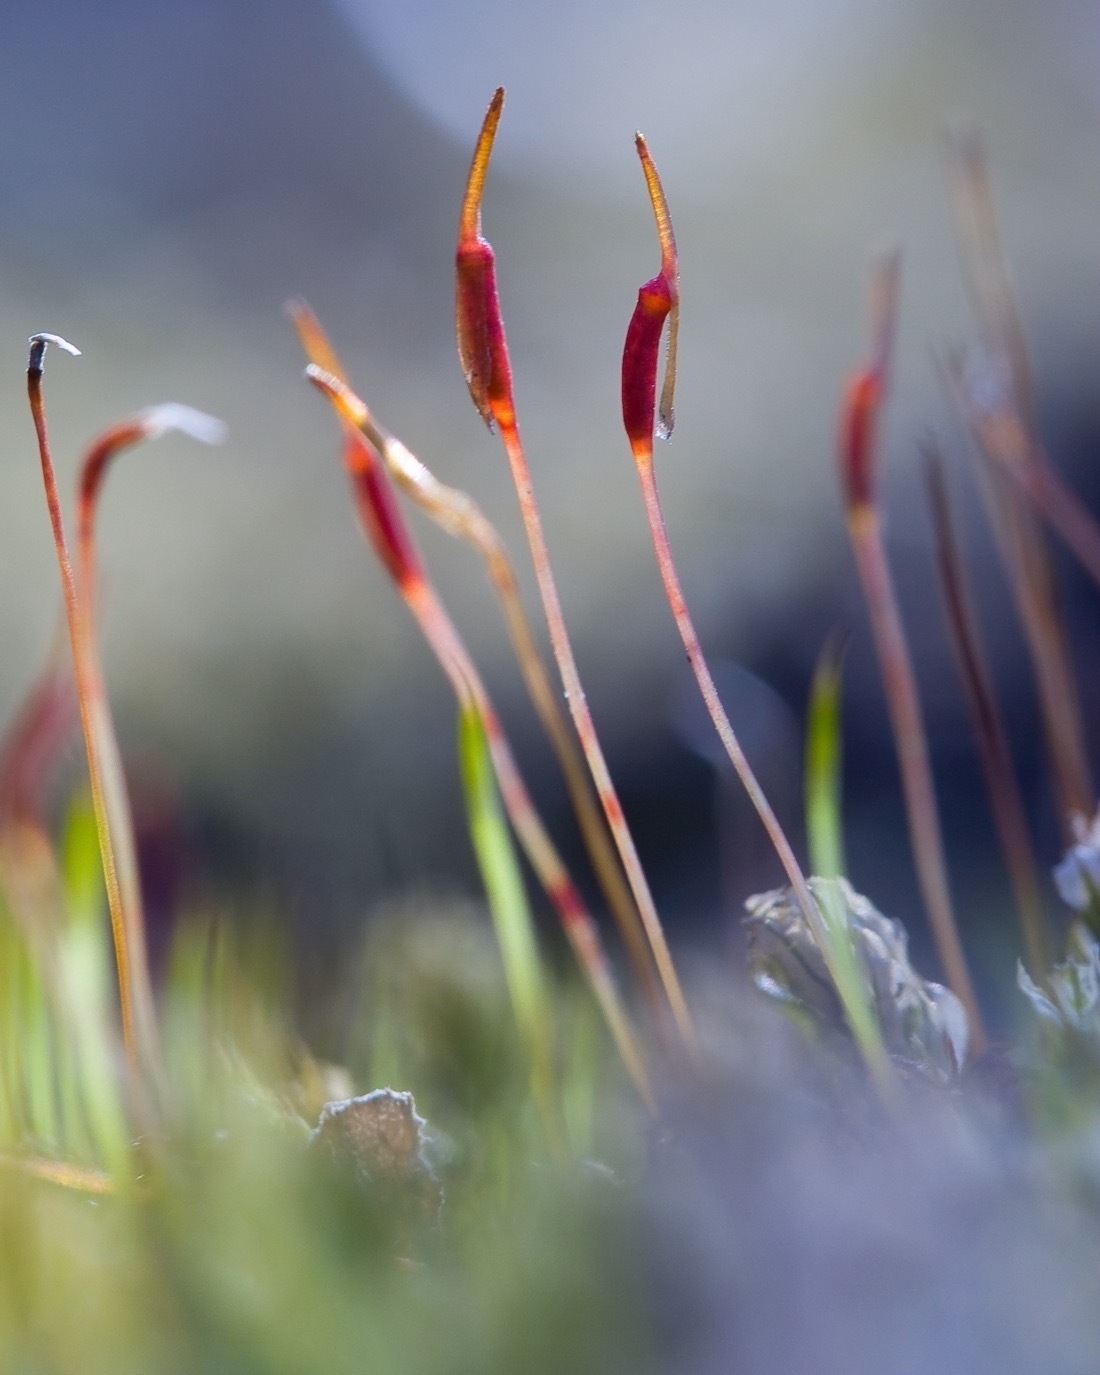 A close-up image of  several pink-red moss Sporophytes, the stems a ovular capsule and with a pointed tip at the end.